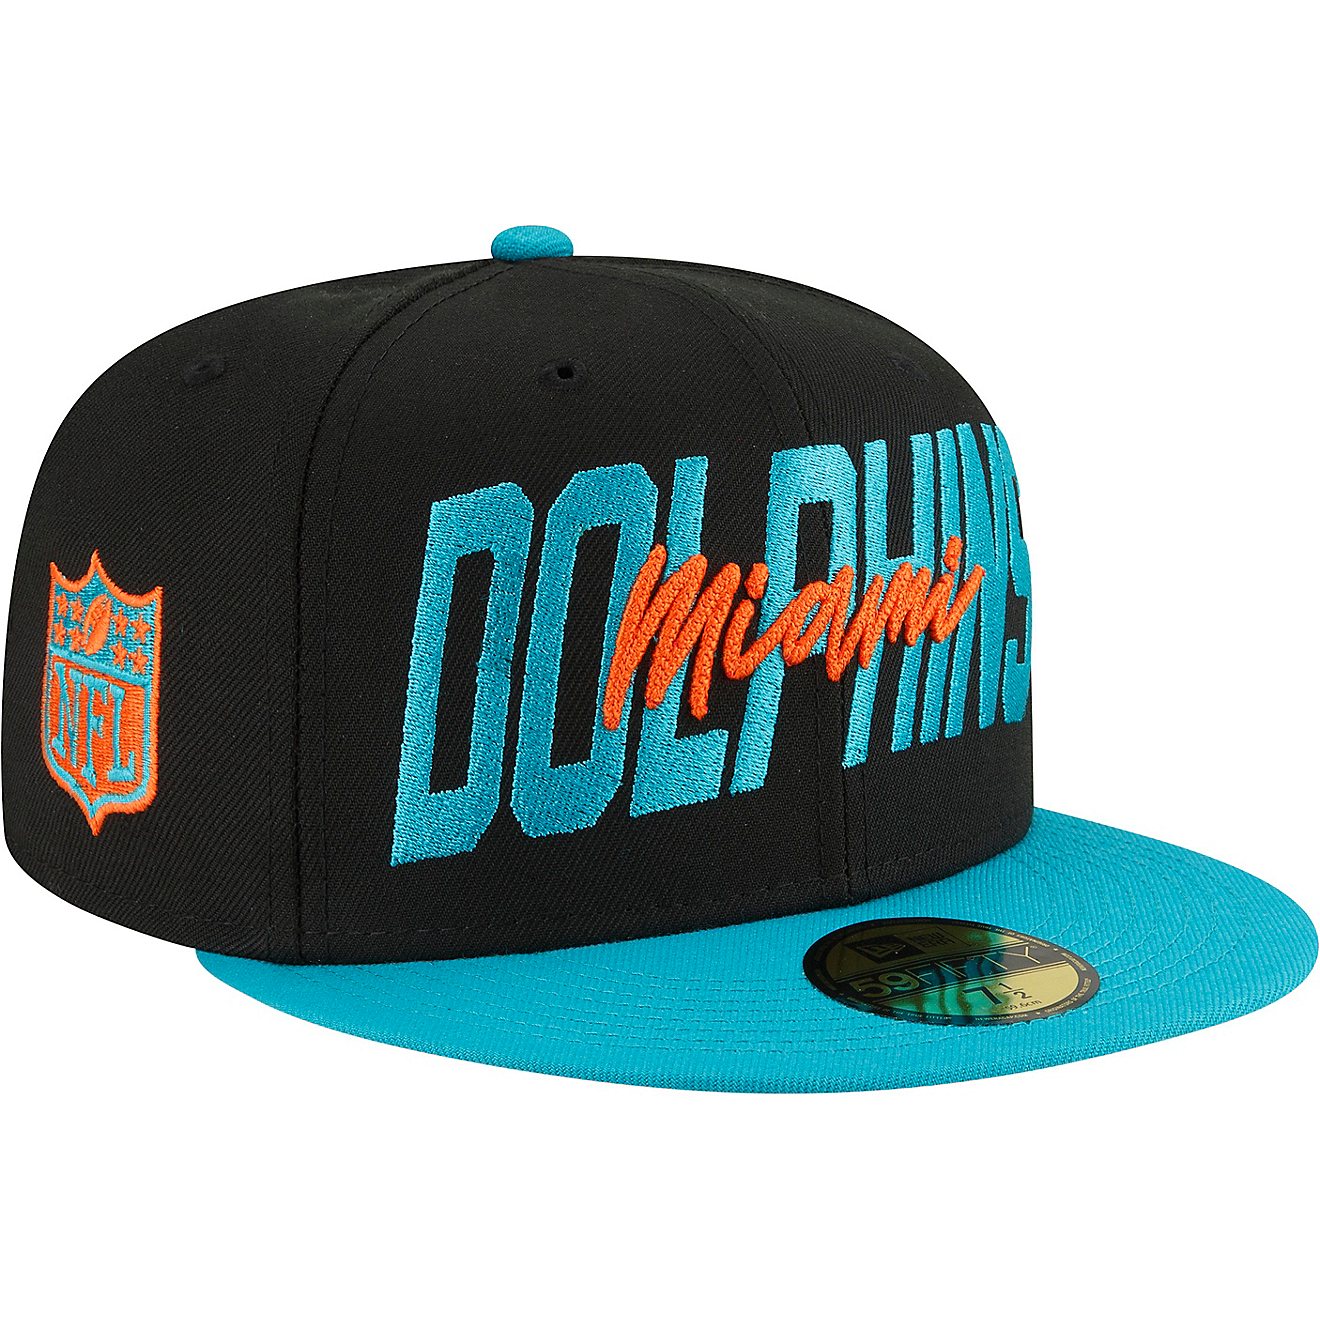 New Era Men's Miami Dolphins NFL Draft 22 59FIFTY Cap                                                                            - view number 3